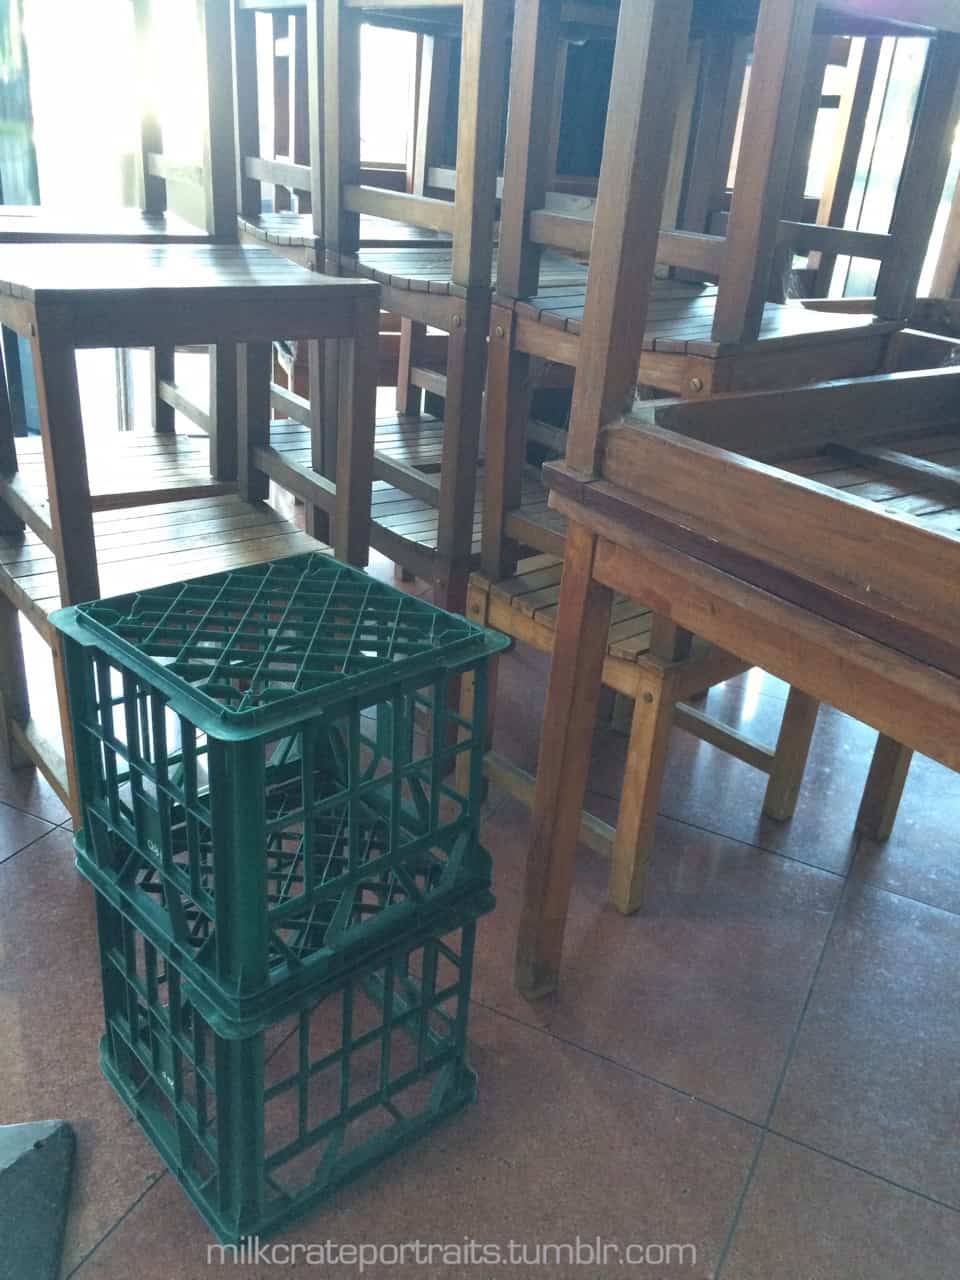 Crates and tables